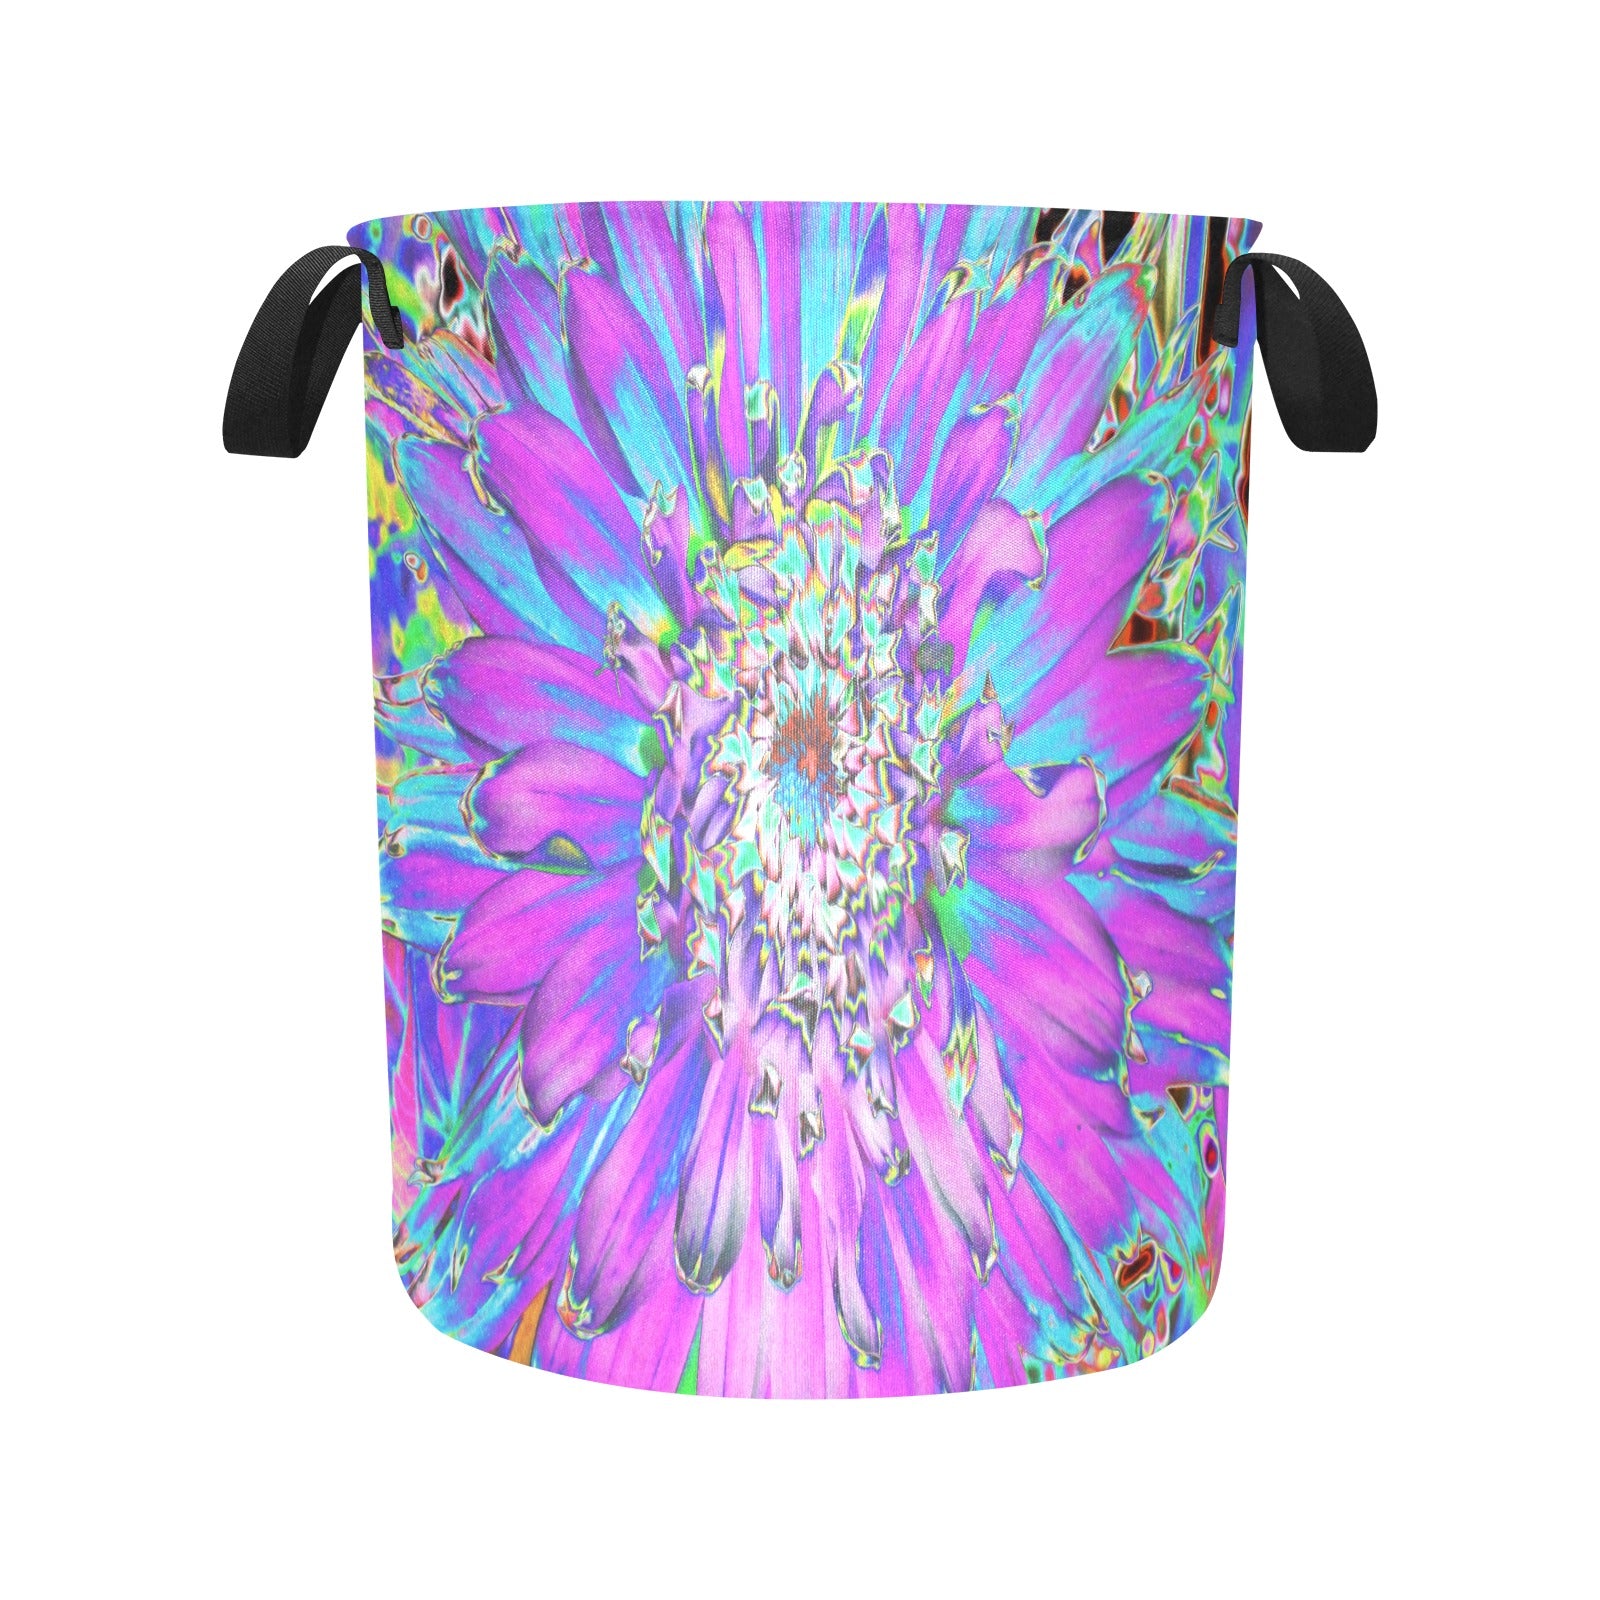 Fabric Laundry Basket with Handles, Trippy Abstract Aqua, Lime Green and Purple Dahlia